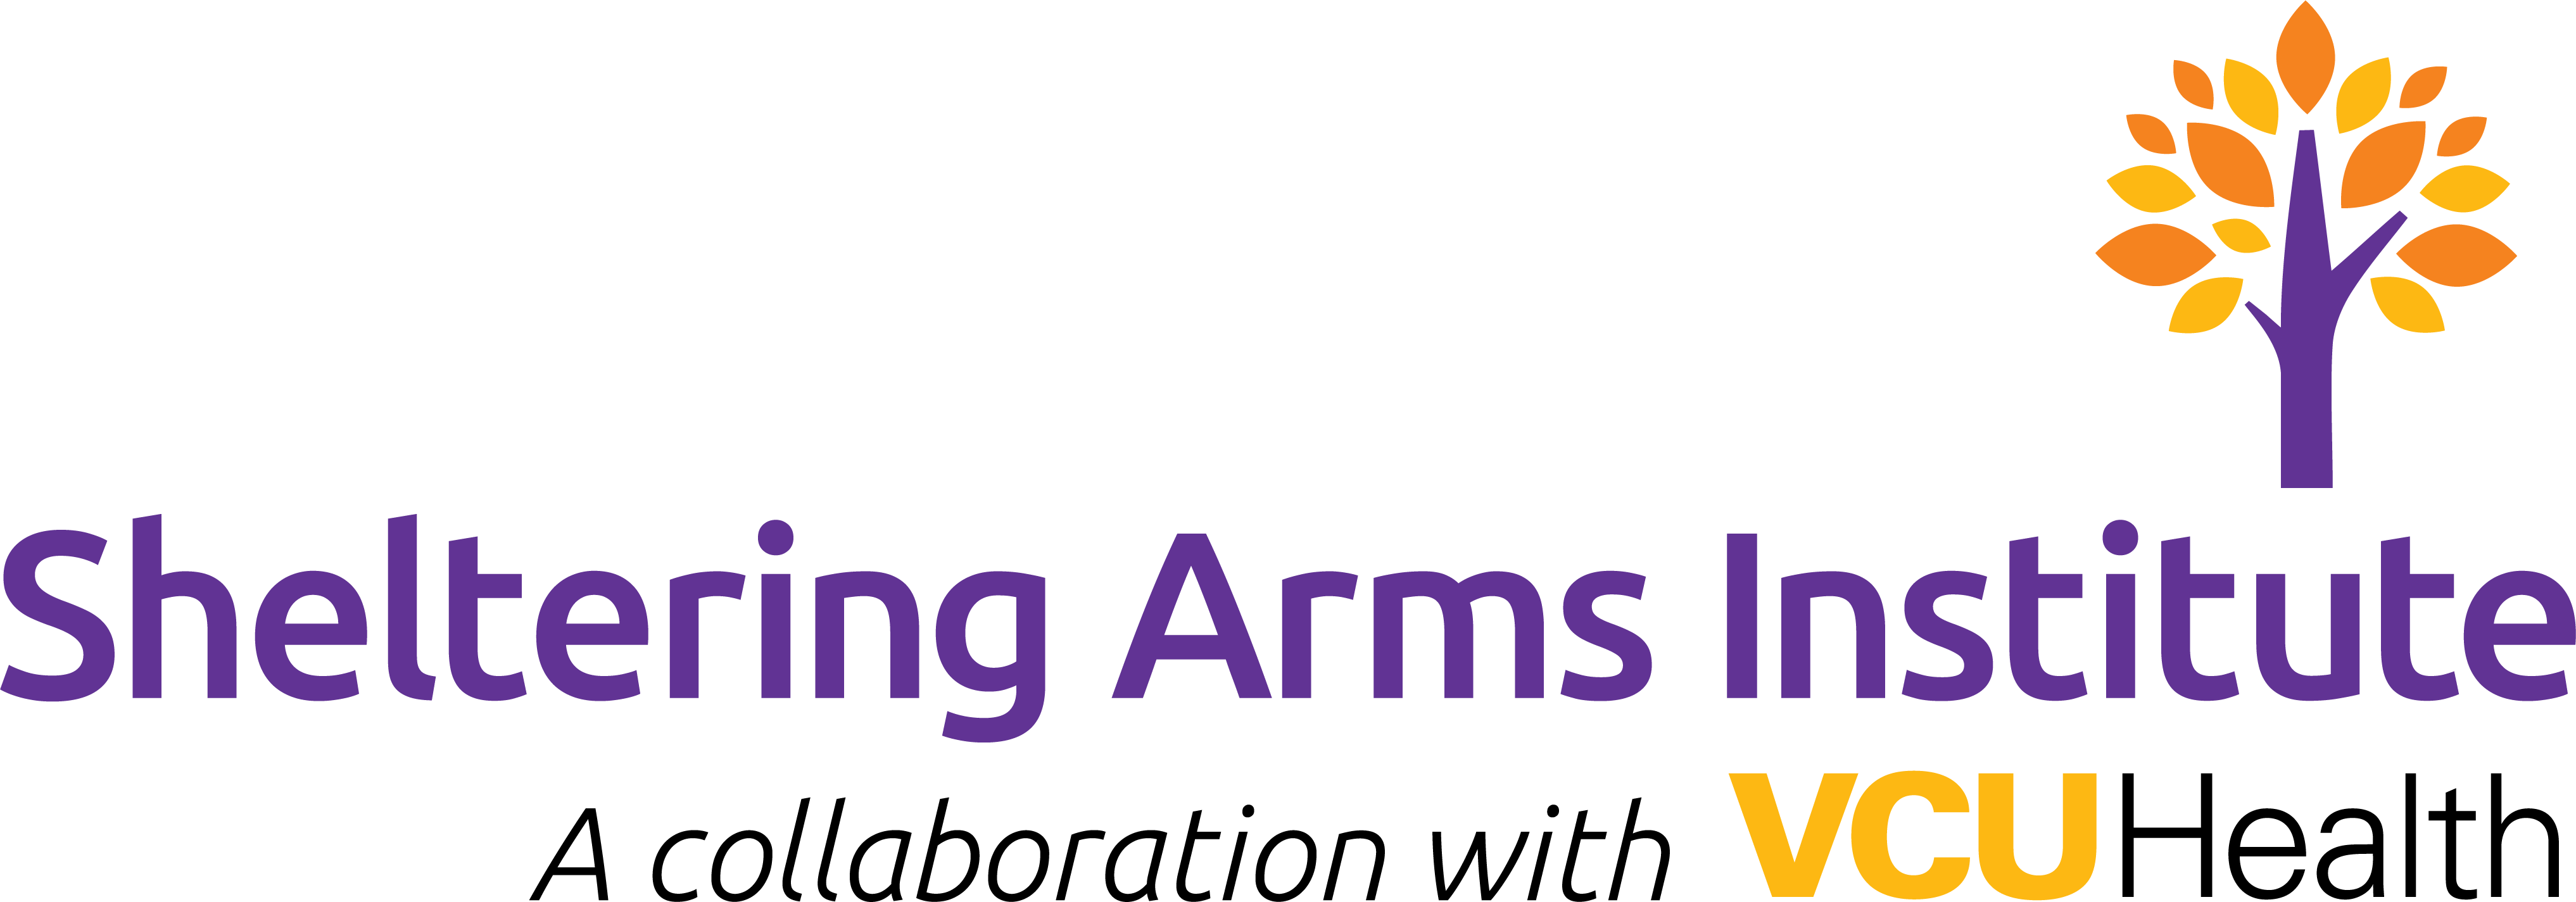 Sheltering Arms Institute logo